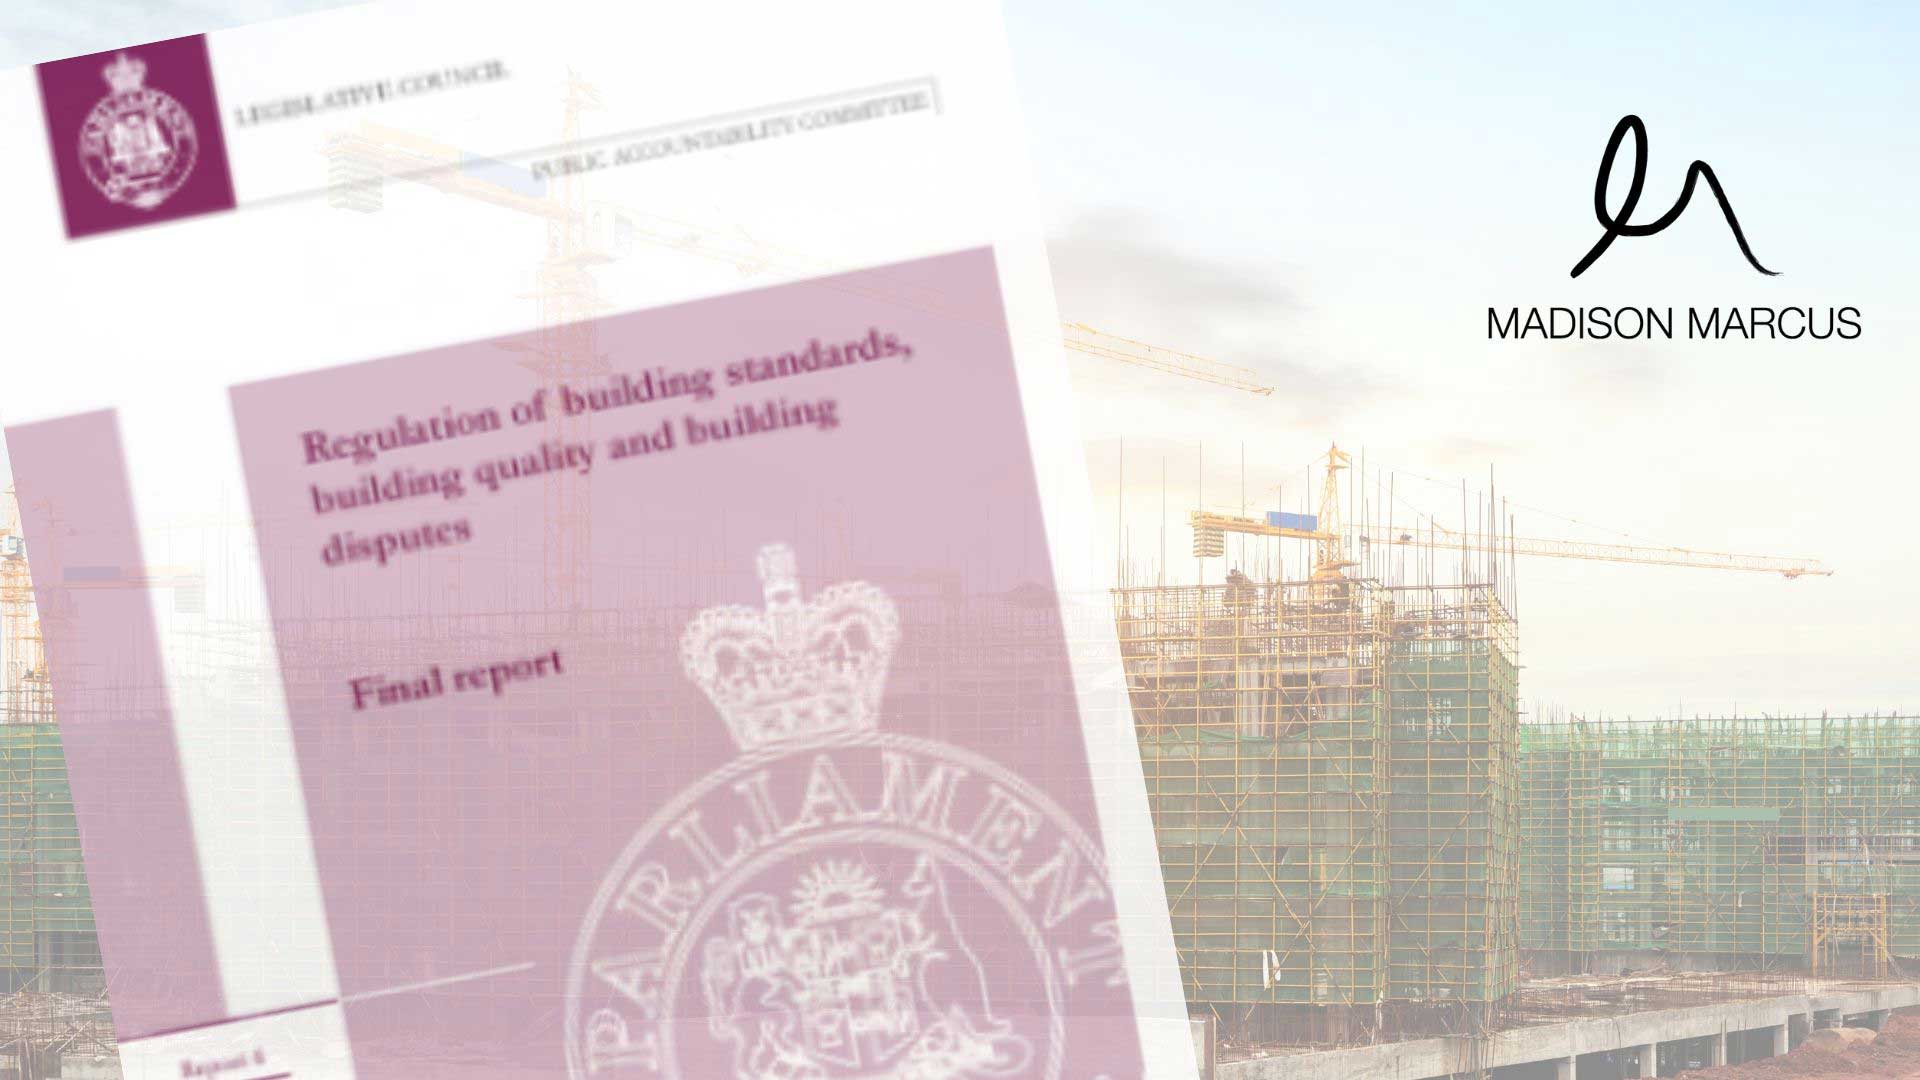 BREAKING NEWS: SIGNIFICANT BUILDING INDUSTRY CHANGES TO COME AS NSW PARLIAMENT RELEASES FINAL REPORT